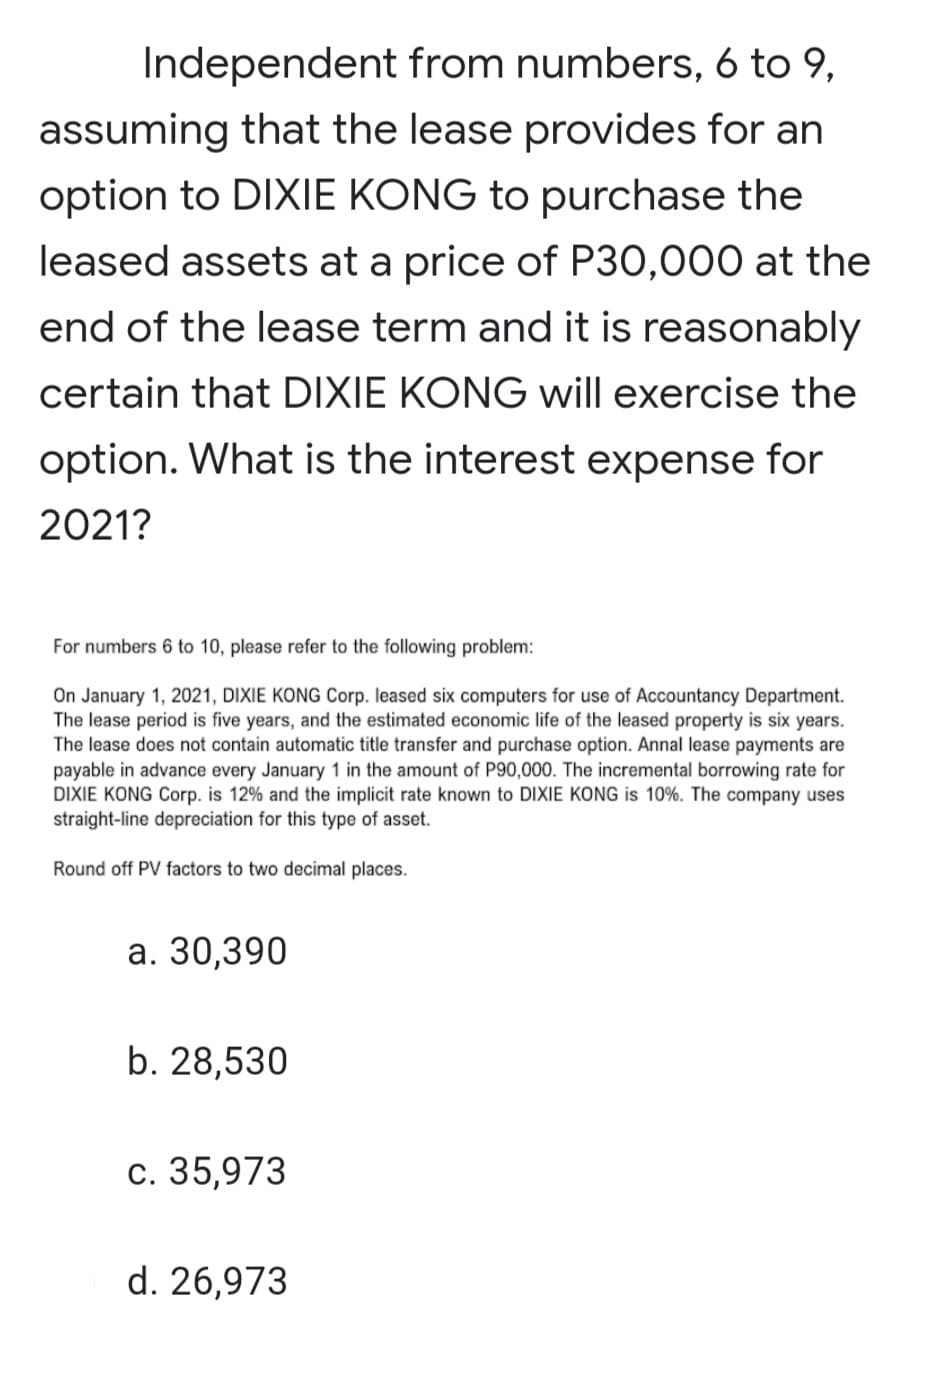 Independent from numbers, 6 to 9,
assuming that the lease provides for an
option to DIXIE KONG to purchase the
leased assets at a price of P30,000 at the
end of the lease term and it is reasonably
certain that DIXIE KONG will exercise the
option. What is the interest expense for
2021?
For numbers 6 to 10, please refer to the following problem:
On January 1, 2021, DIXIE KONG Corp. leased six computers for use of Accountancy Department.
The lease period is five years, and the estimated economic life of the leased property is six years.
The lease does not contain automatic title transfer and purchase option. Annal lease payments are
payable in advance every January 1 in the amount of P90,000. The incremental borrowing rate for
DIXIE KONG Corp. is 12% and the implicit rate known to DIXIE KONG is 10%. The company uses
straight-line depreciation for this type of asset.
Round off PV factors to two decimal places.
а. 30,390
b. 28,530
с. 35,973
d. 26,973
